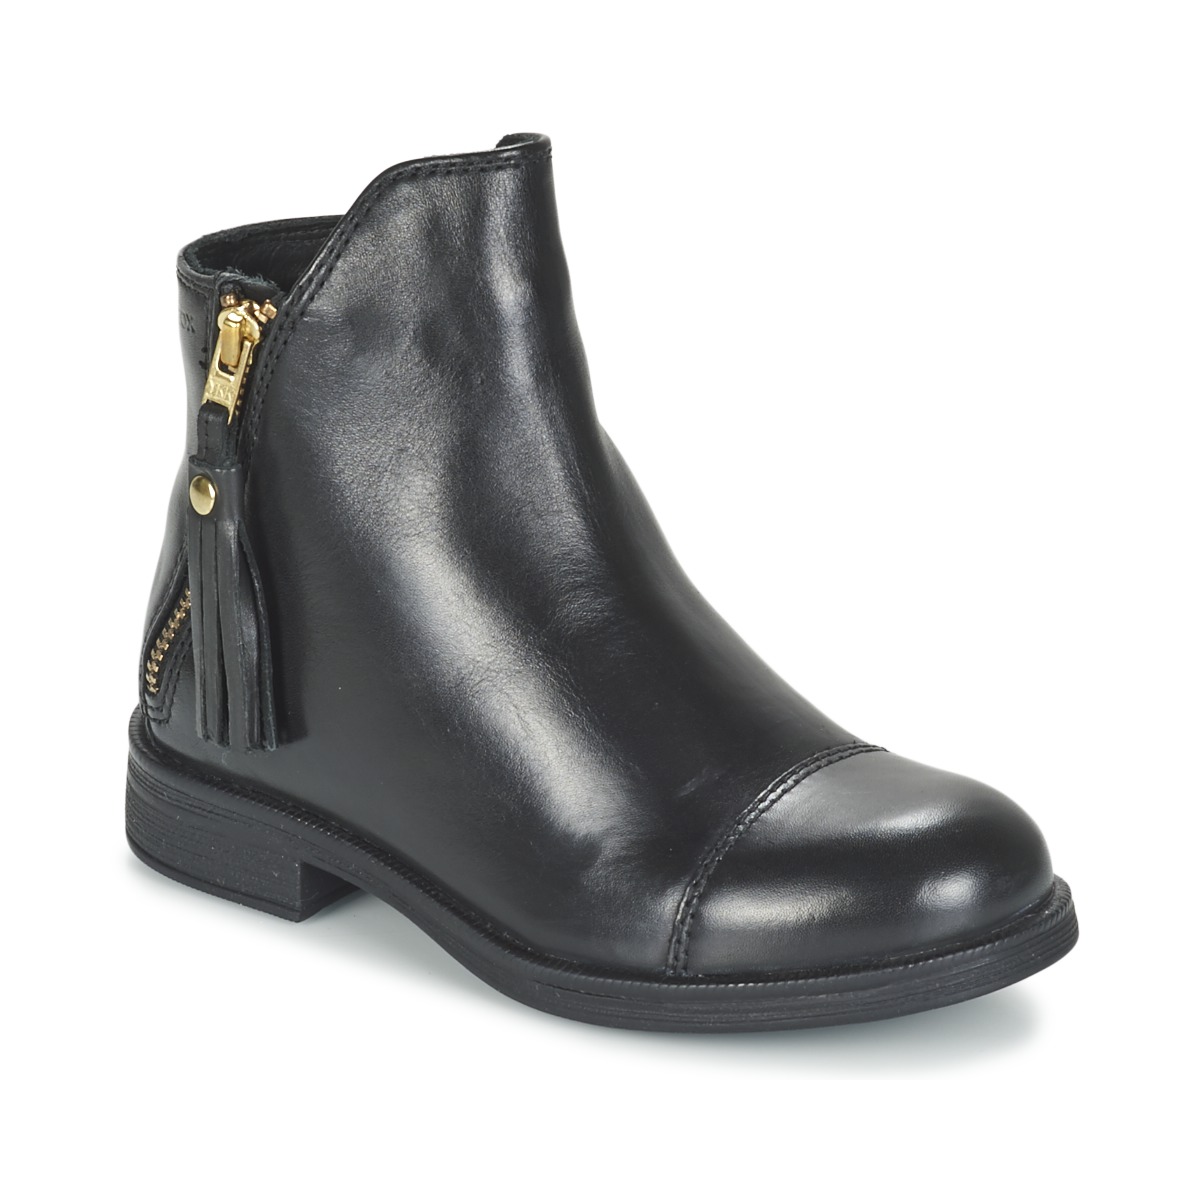 Shoes Girl Mid boots Geox AGATE Black